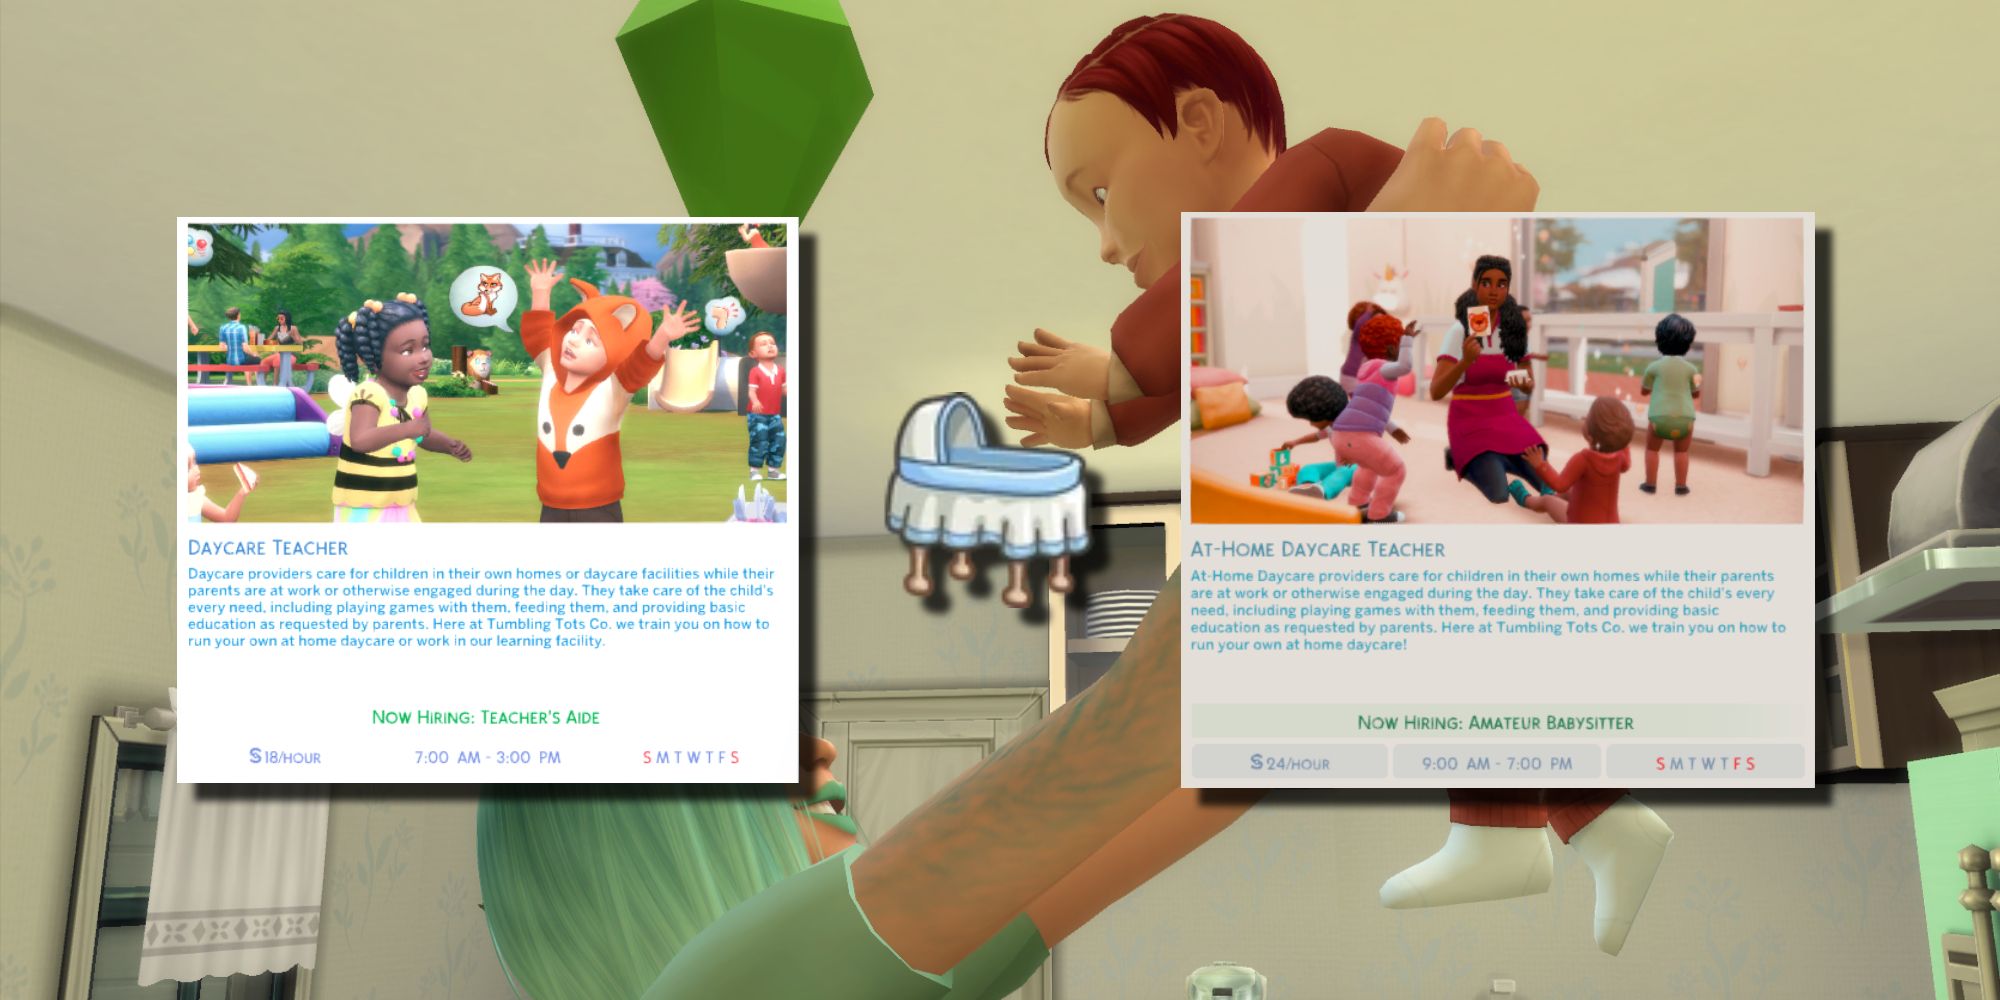 Make a career out of caring for children with the Active Daycare Career Mod